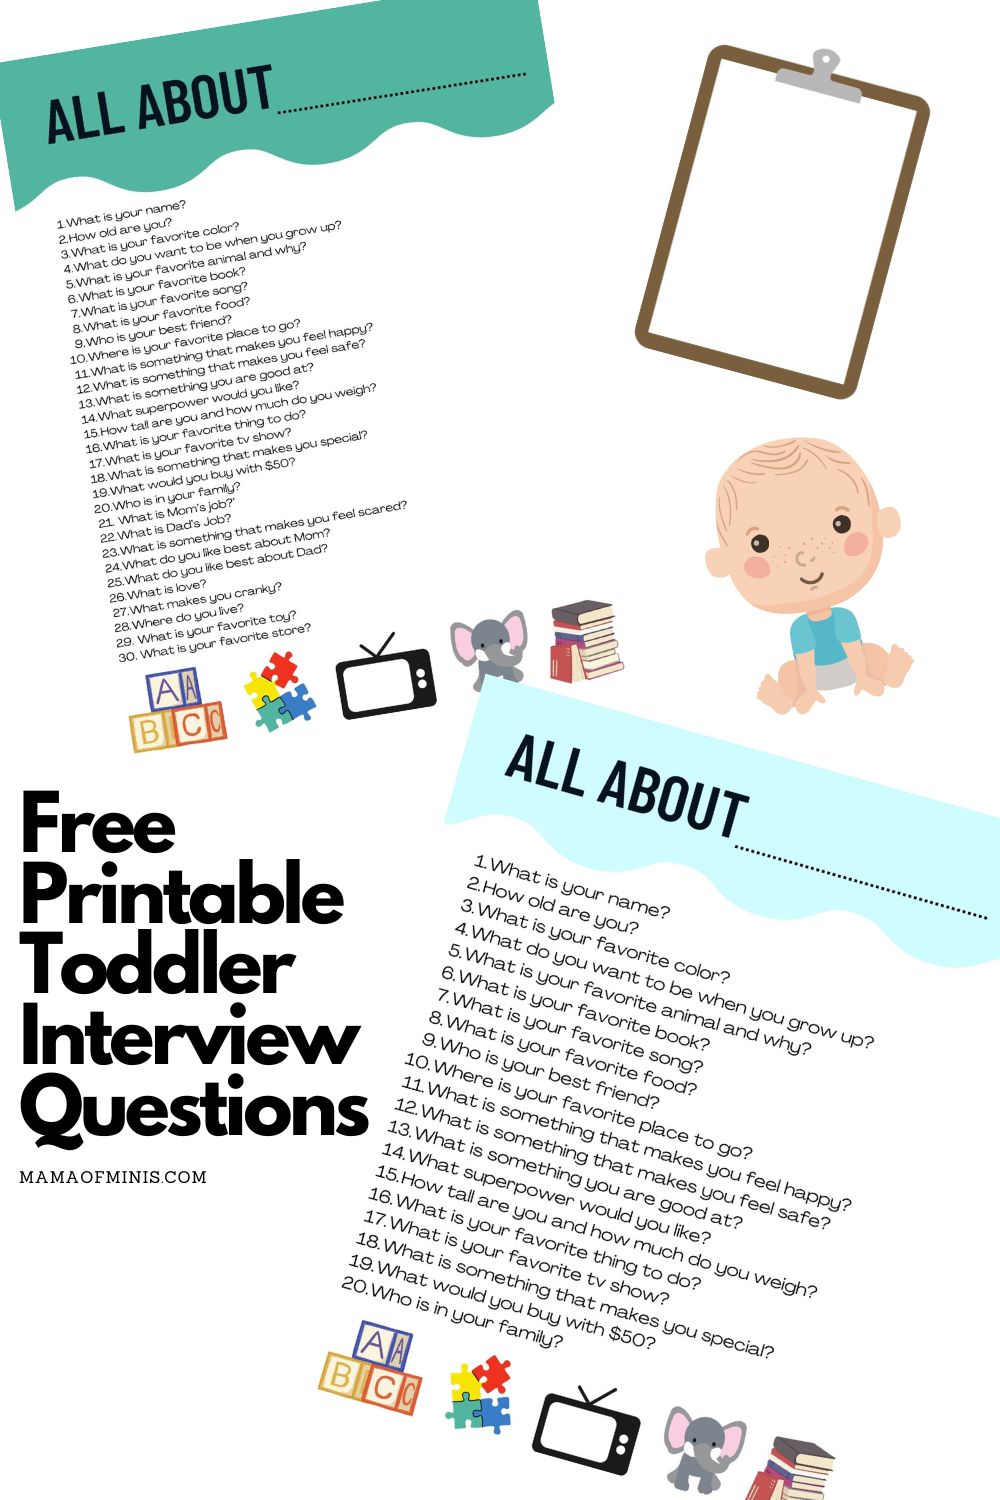 Free Printable Toddler Interview Questions